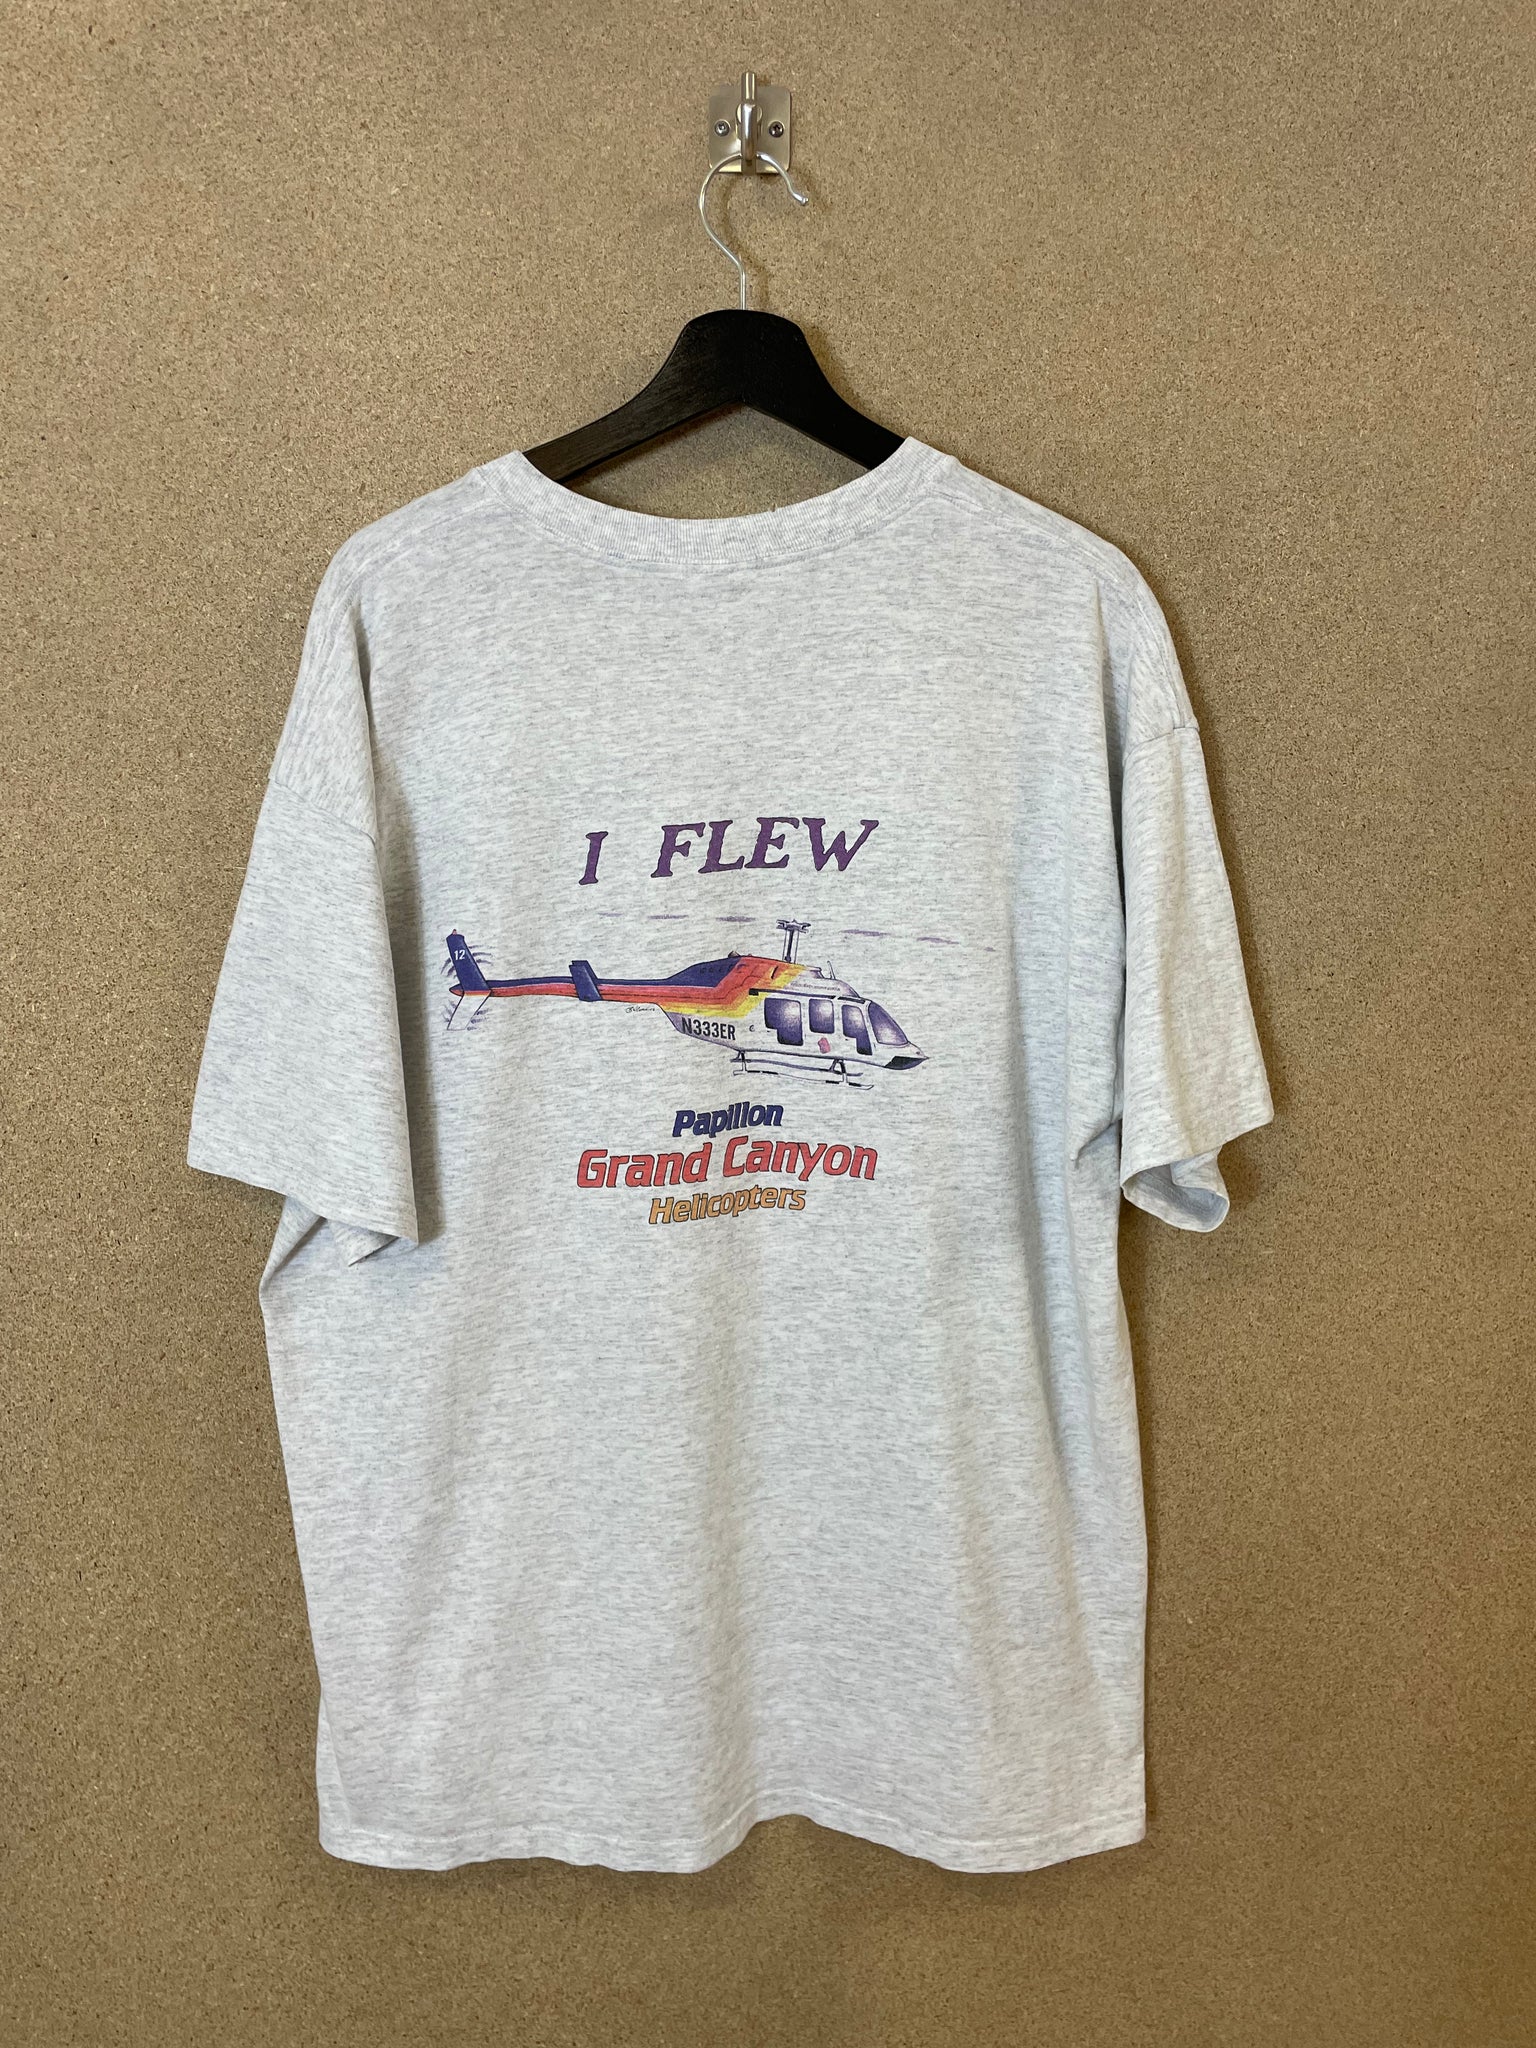 Vintage Papillon Grand Canyon Helicopters 00s Tee - XL